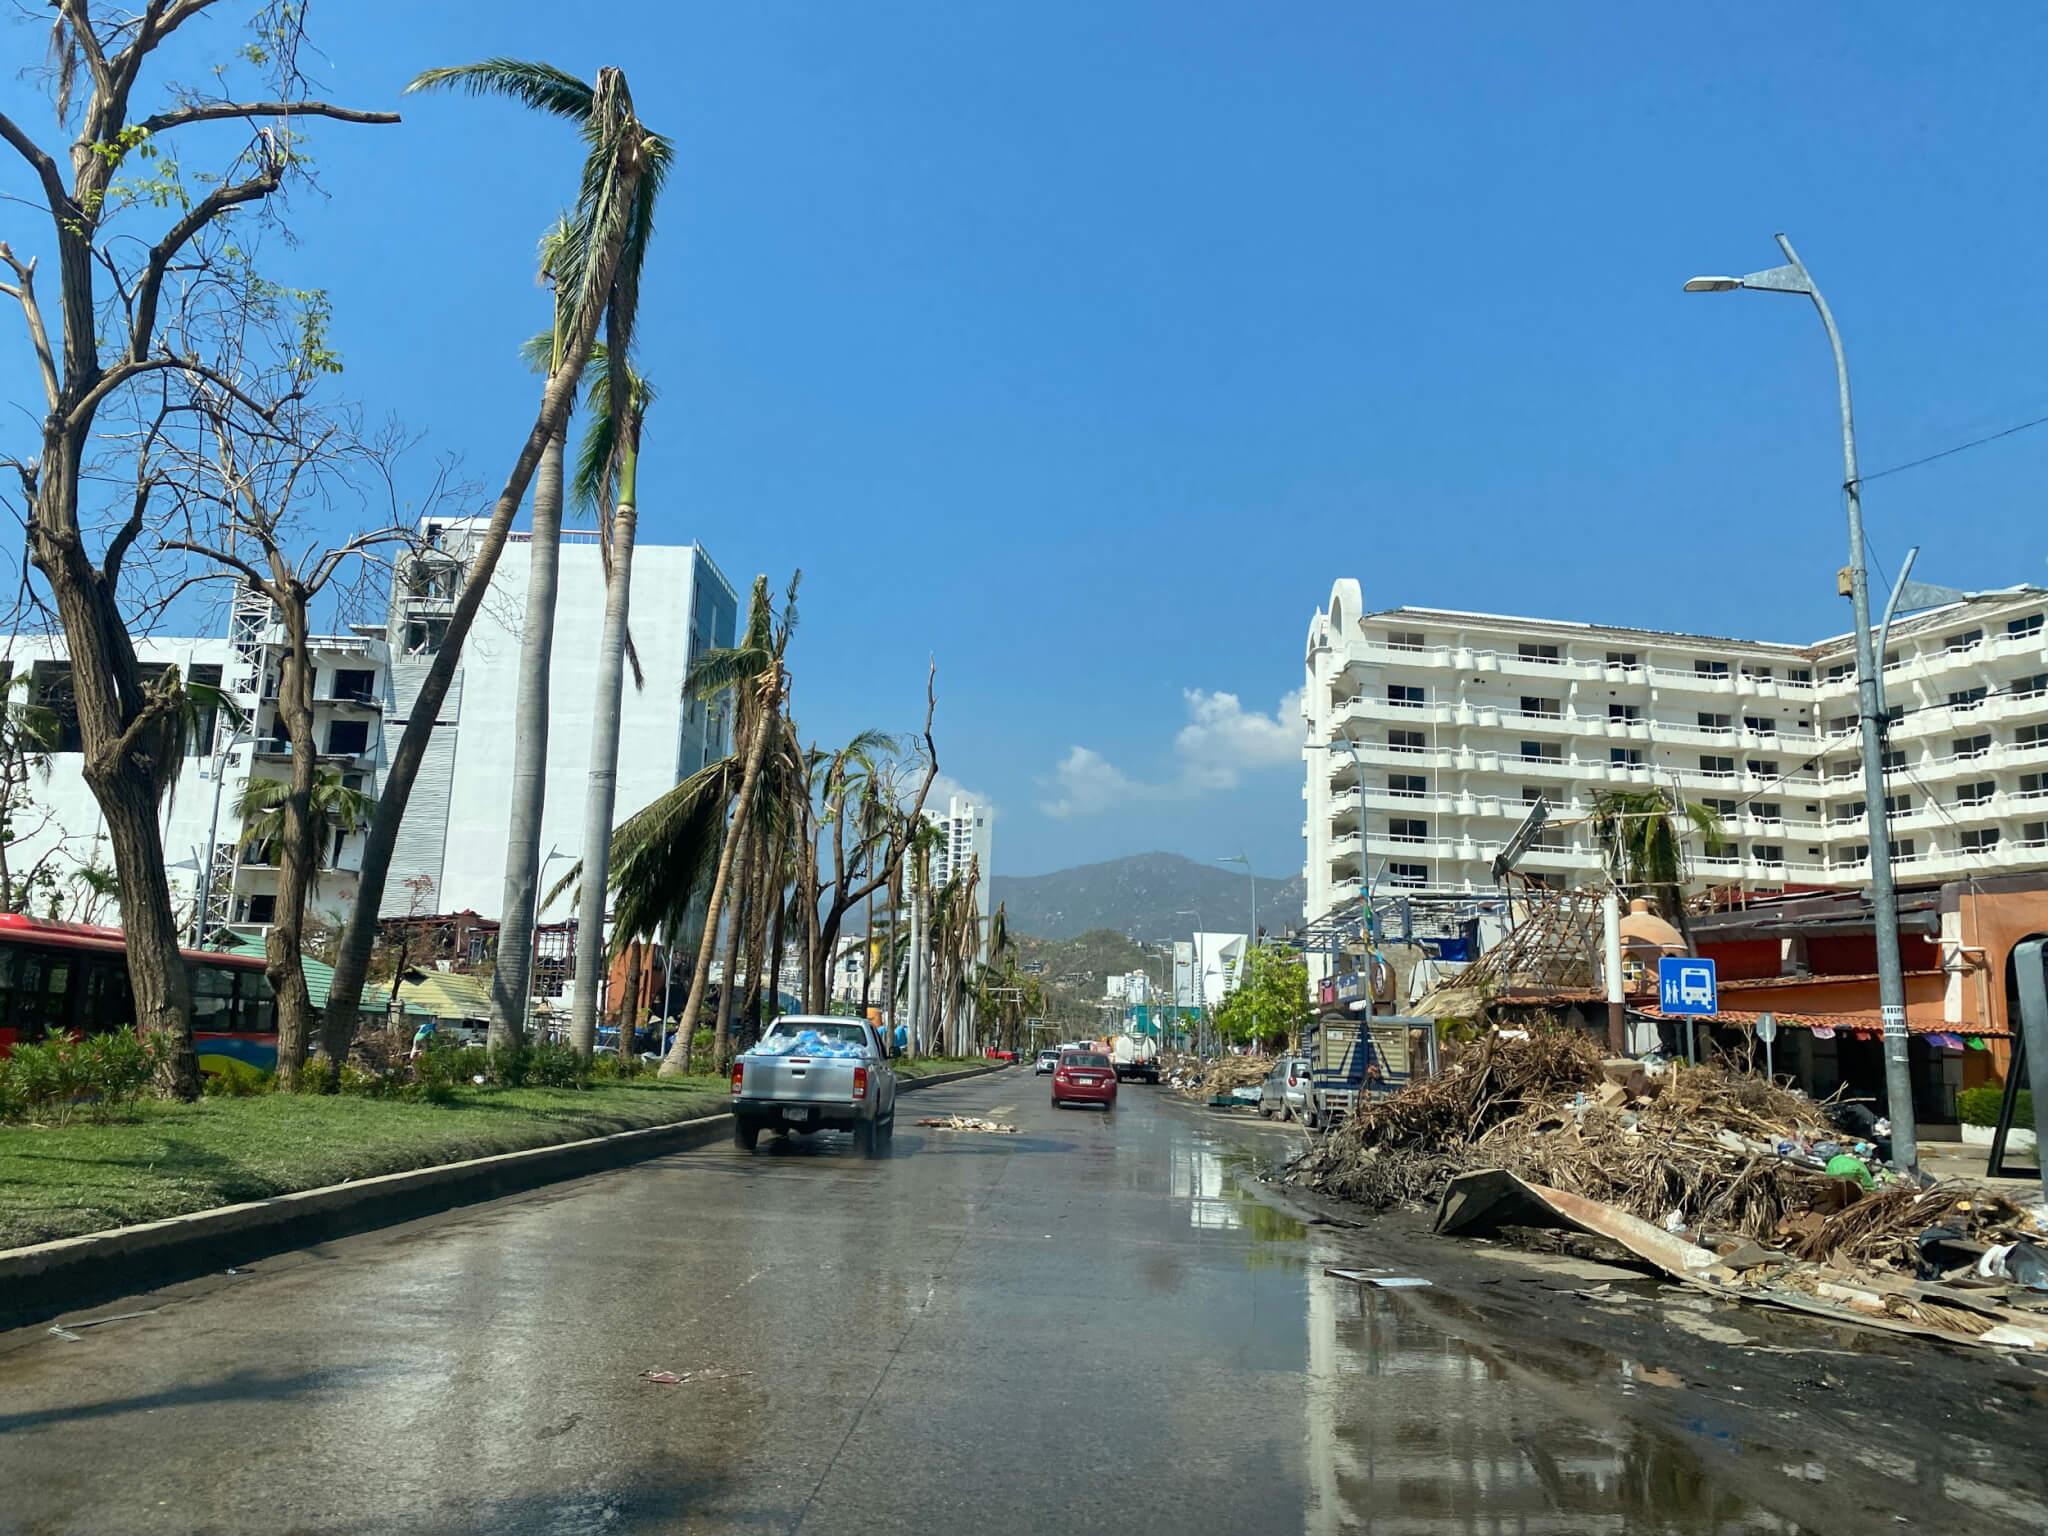 A street with damaged palm trees on the left and a damaged short structure to the right, with a standing white building on the background.